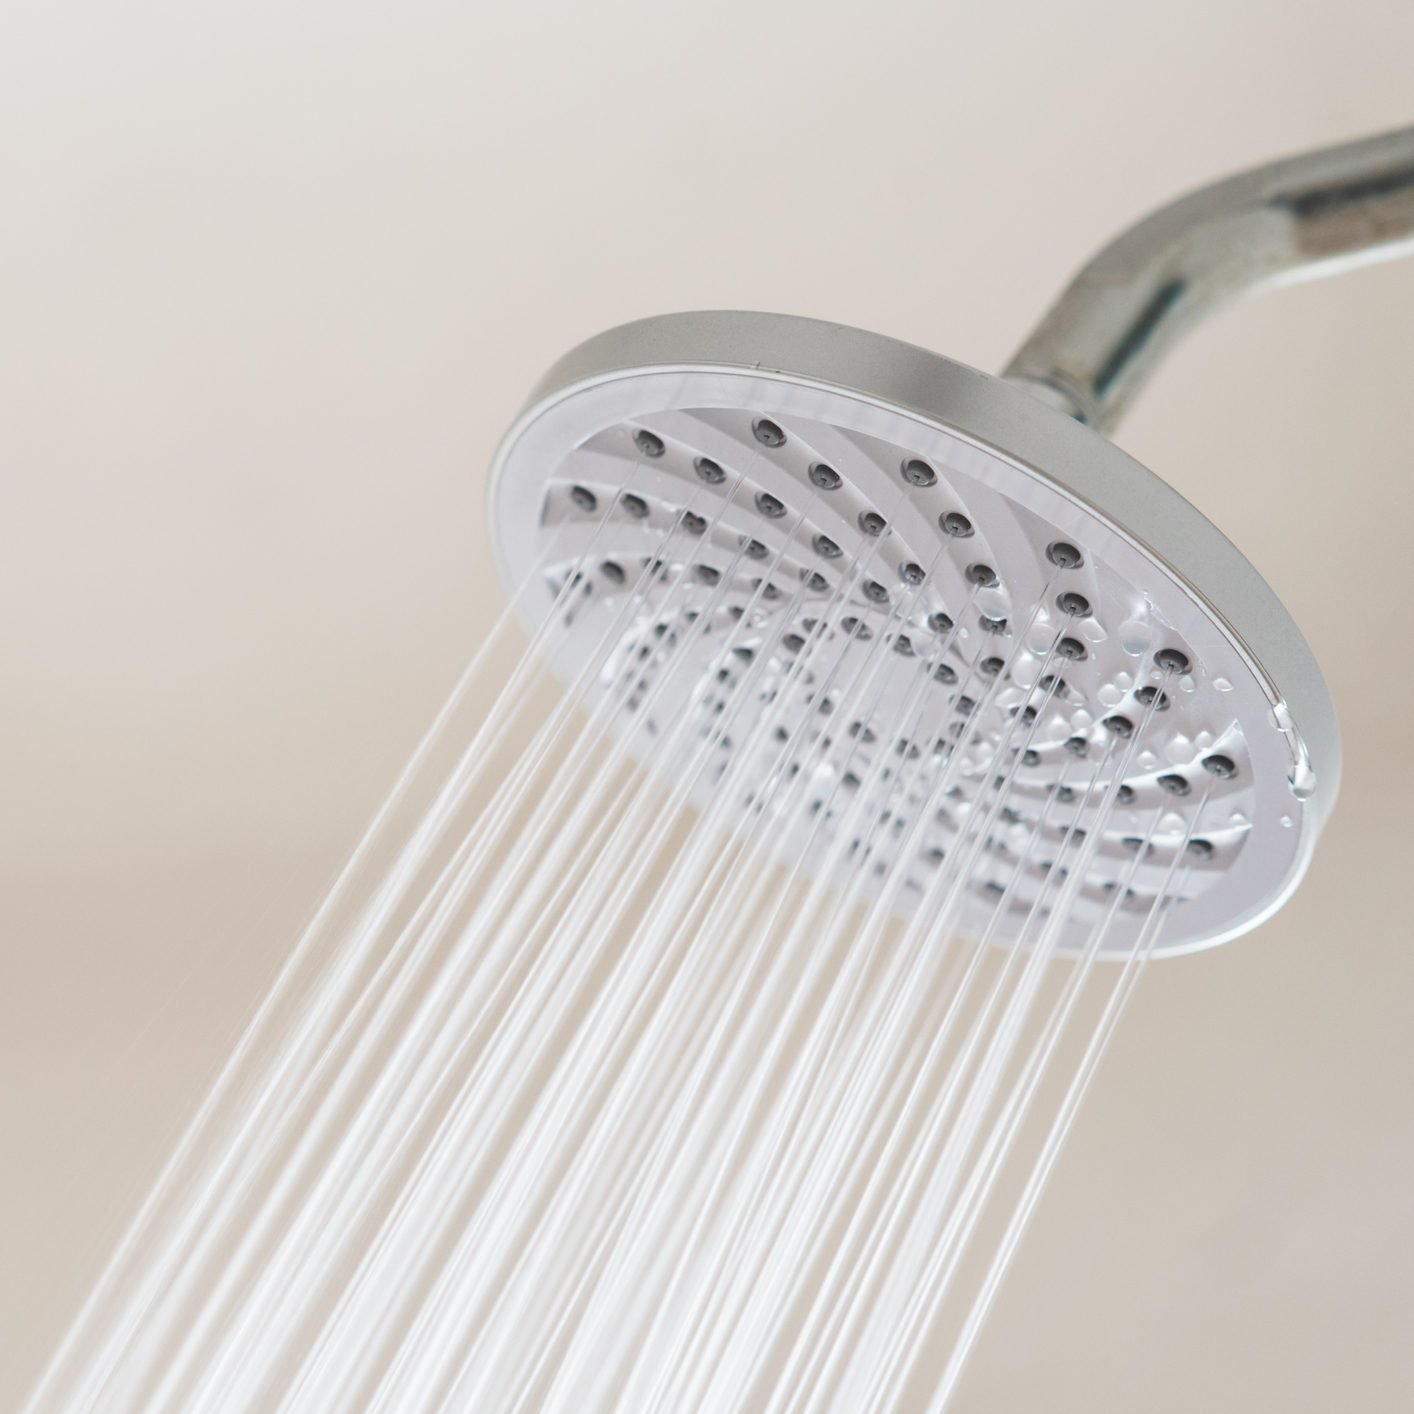 8 Ways You’re Probably Showering Wrong